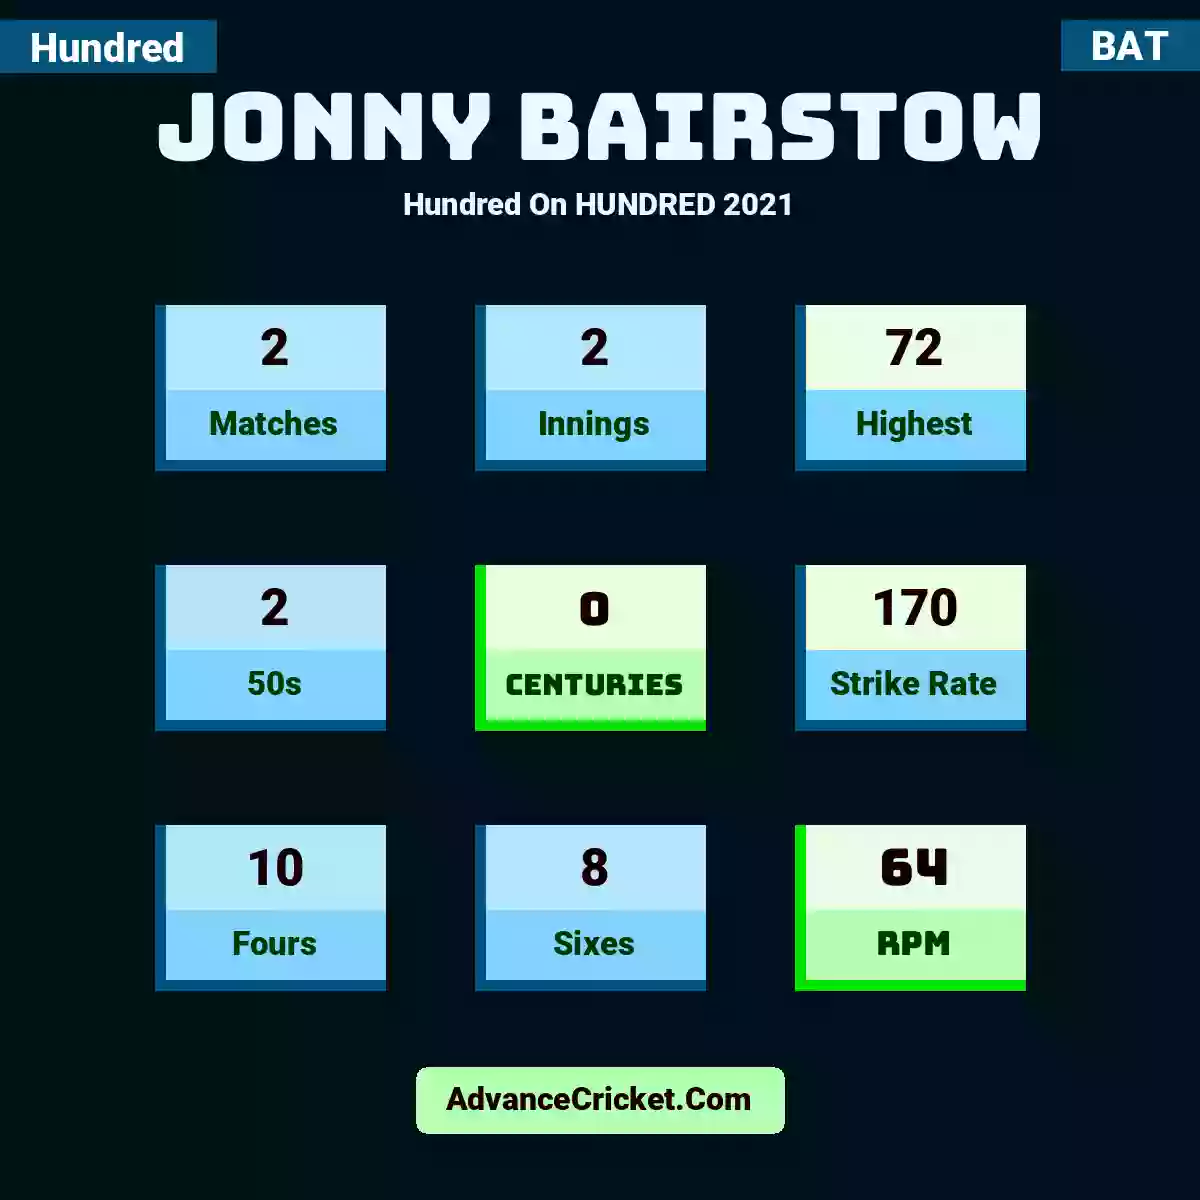 Jonny Bairstow Hundred  On HUNDRED 2021, Jonny Bairstow played 2 matches, scored 72 runs as highest, 2 half-centuries, and 0 centuries, with a strike rate of 170. J.Bairstow hit 10 fours and 8 sixes, with an RPM of 64.